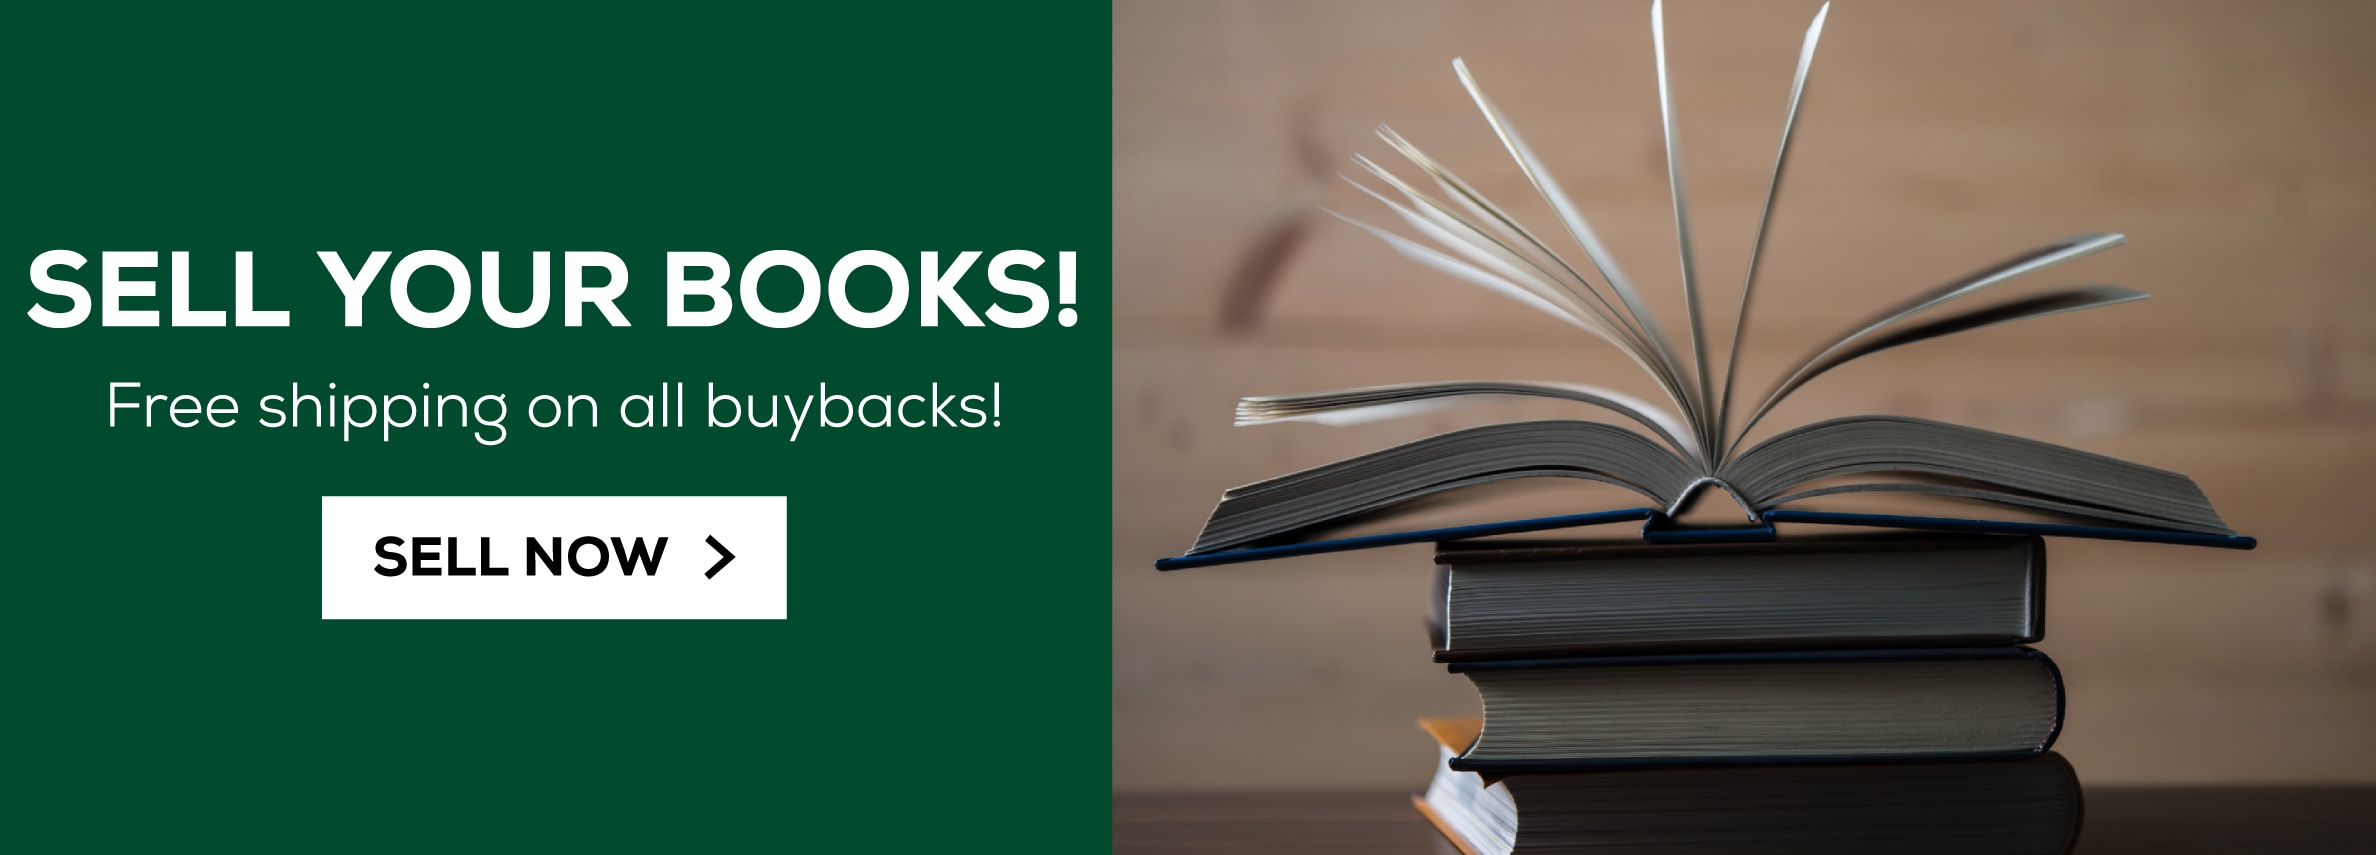 Sell your books! Free shipping on all buybacks! Sell now.